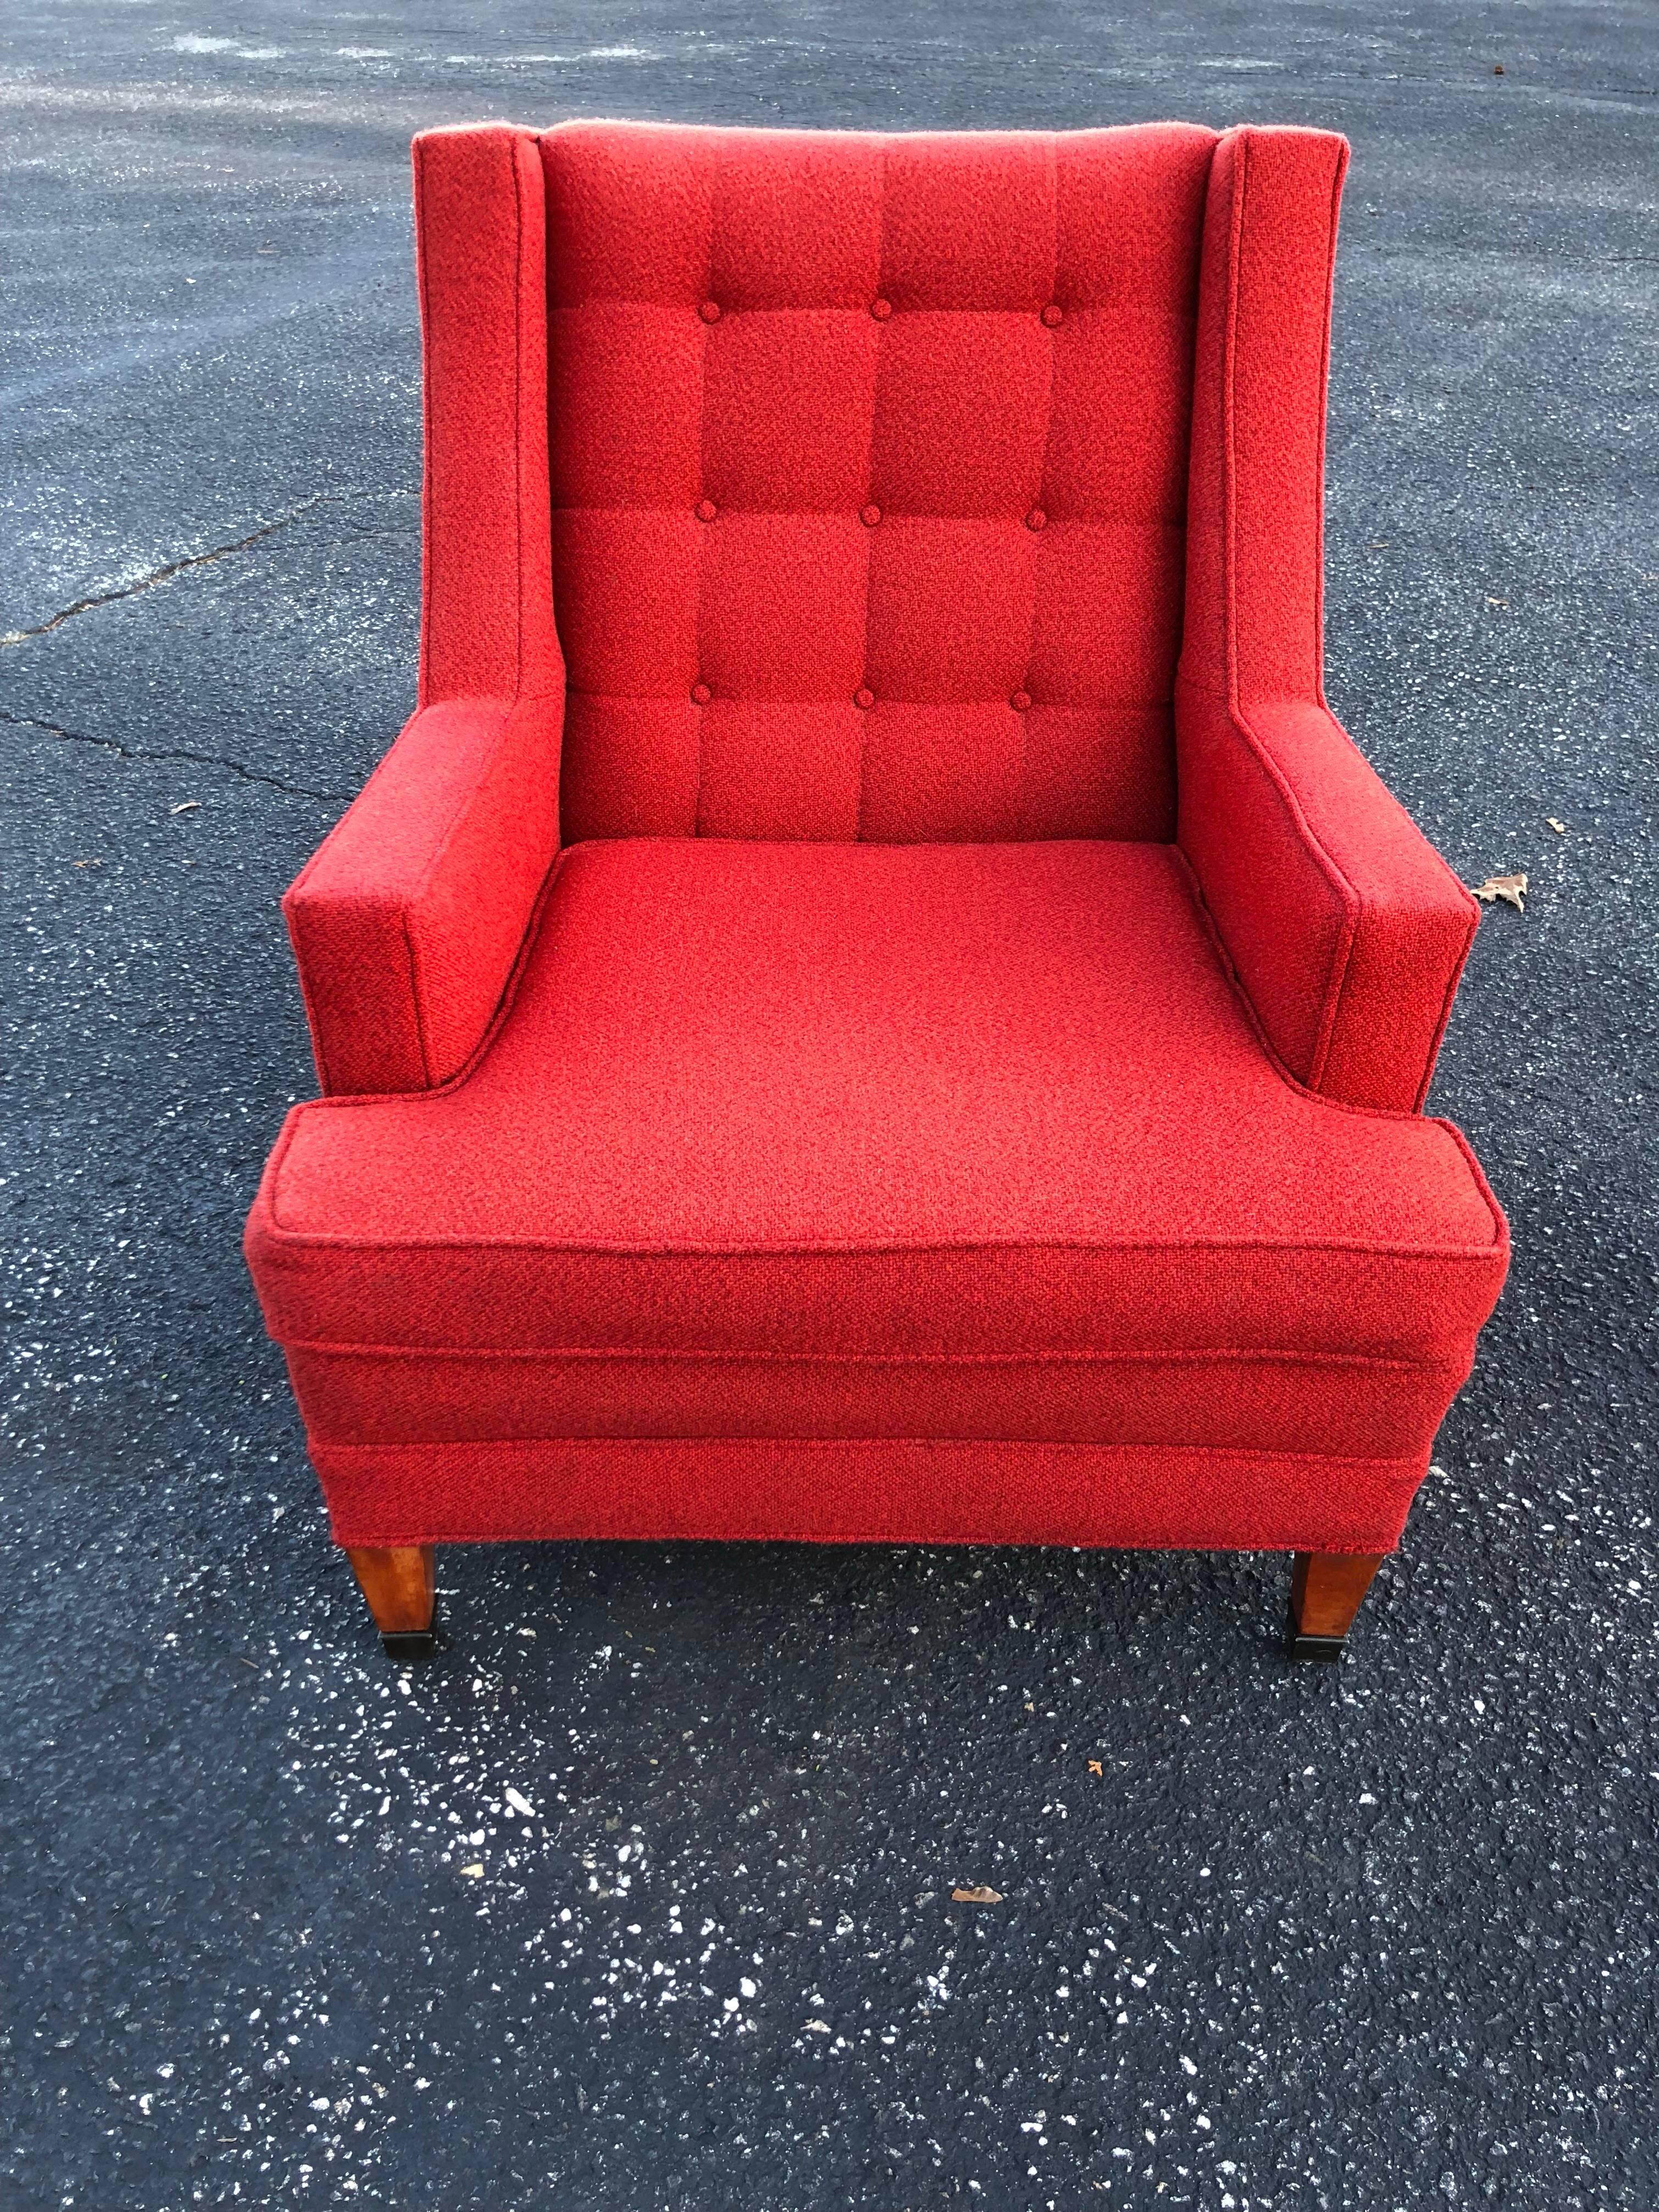 Mid-Century lounge chair in red. Tufted button back with simple tailored lines make up this Classic chair. Great for bedroom, living room or office. Solid, heavy construction. Wooden legs with adorned metal front feet.
 